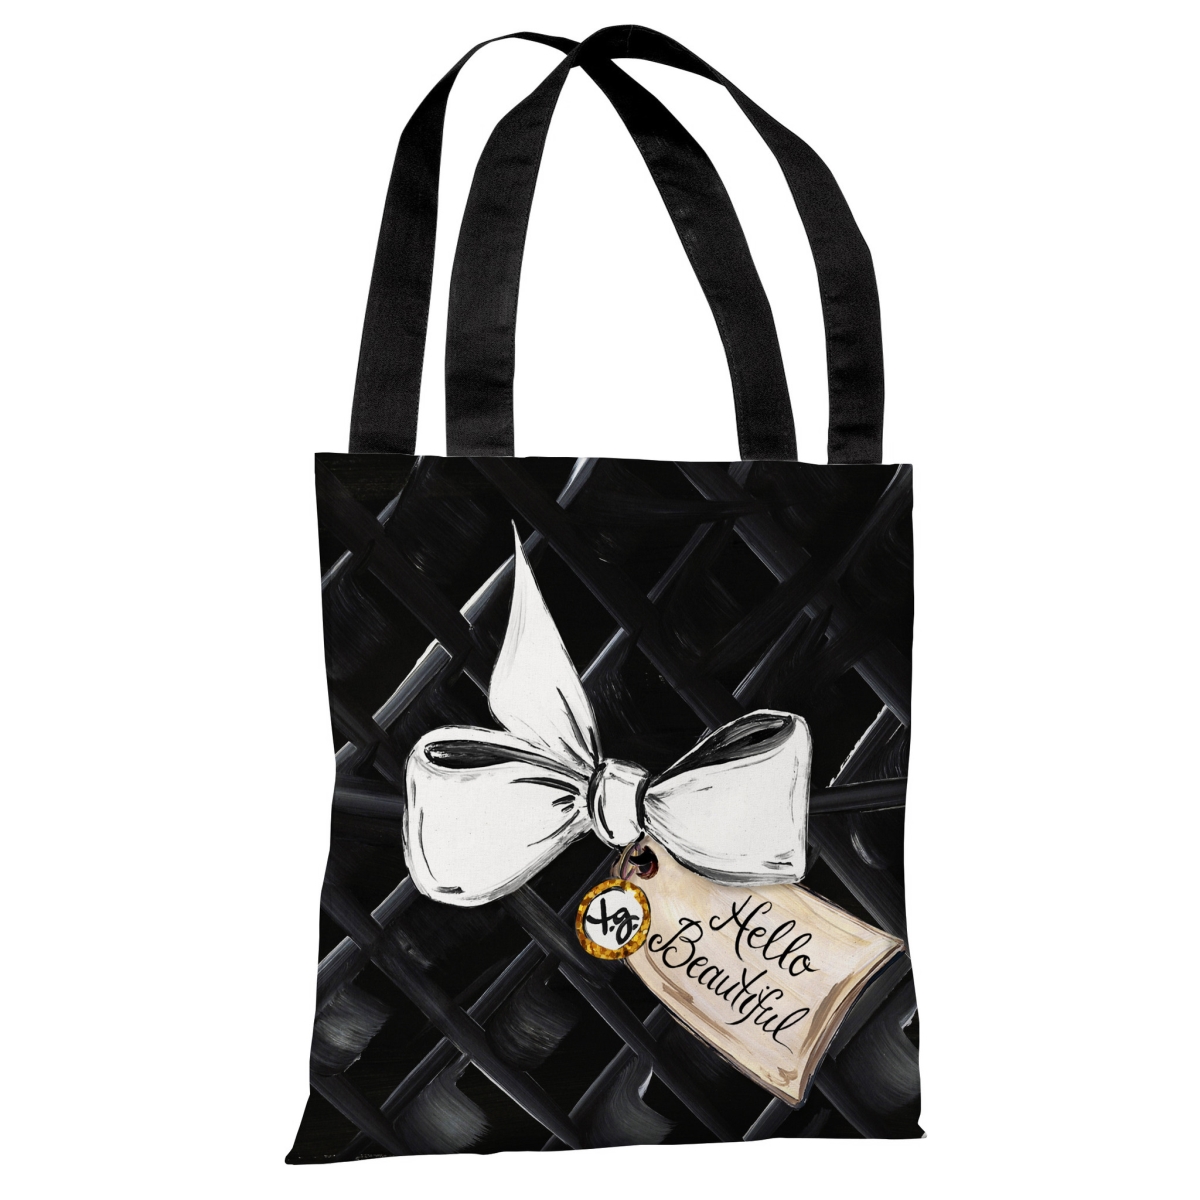 73059tt18p 18 In. Hello Beautiful Bow & Gold Glitter Polyester Tote Bag By Timree Gold - Black, White